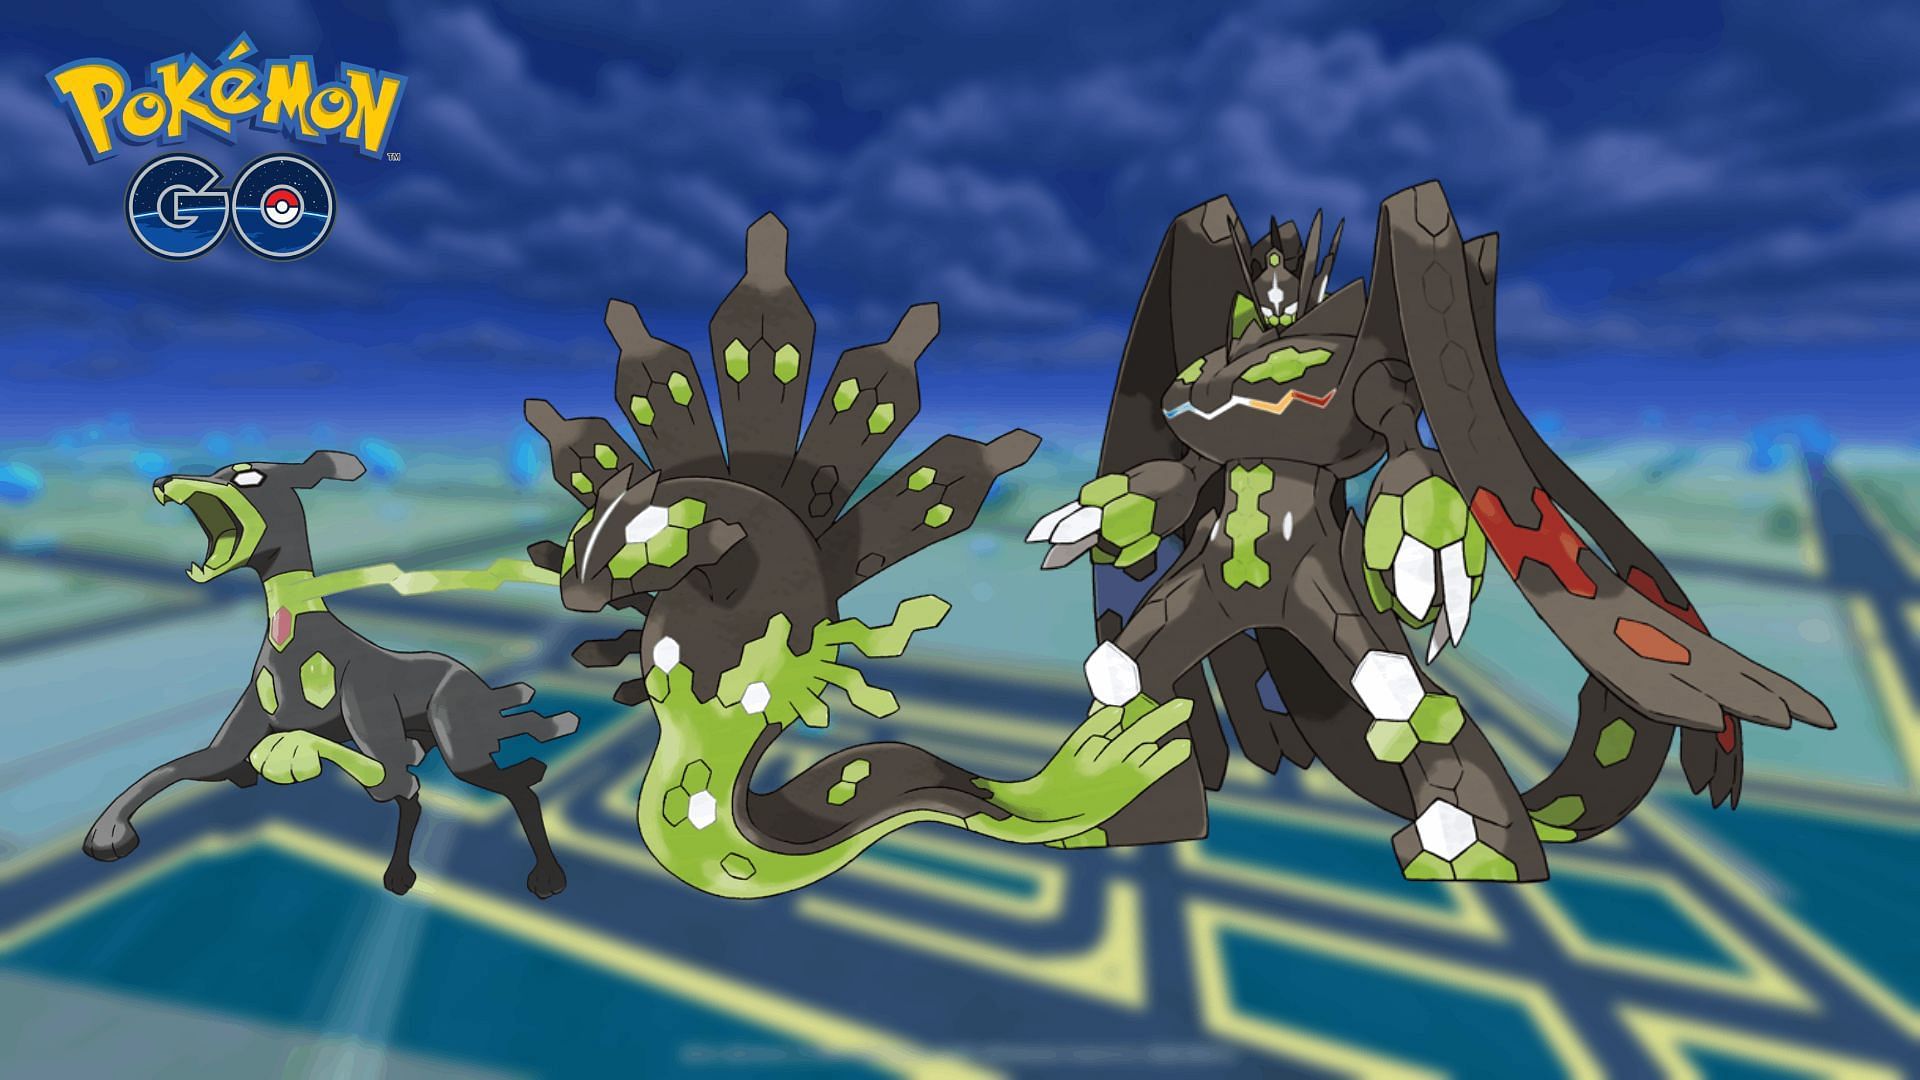 All three forms of Zygarde